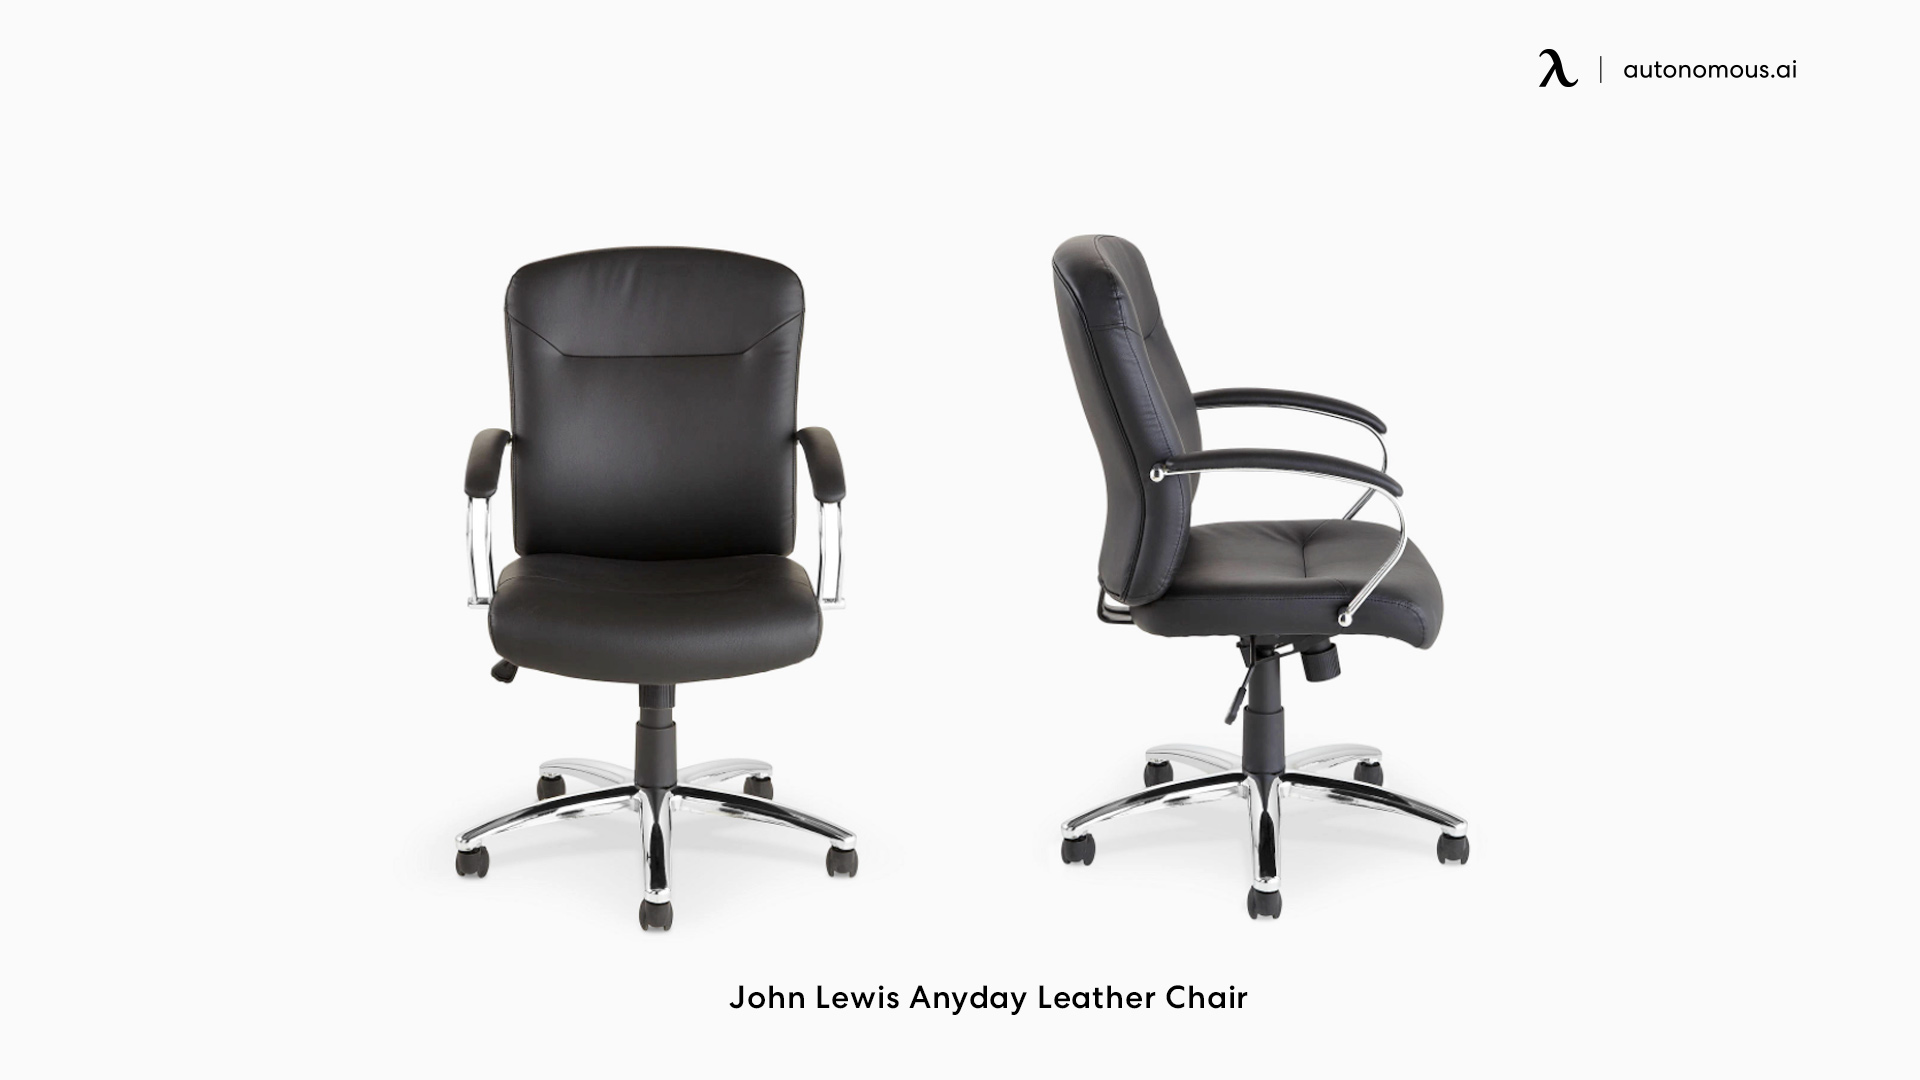 John Lewis Anyday Leather Chair